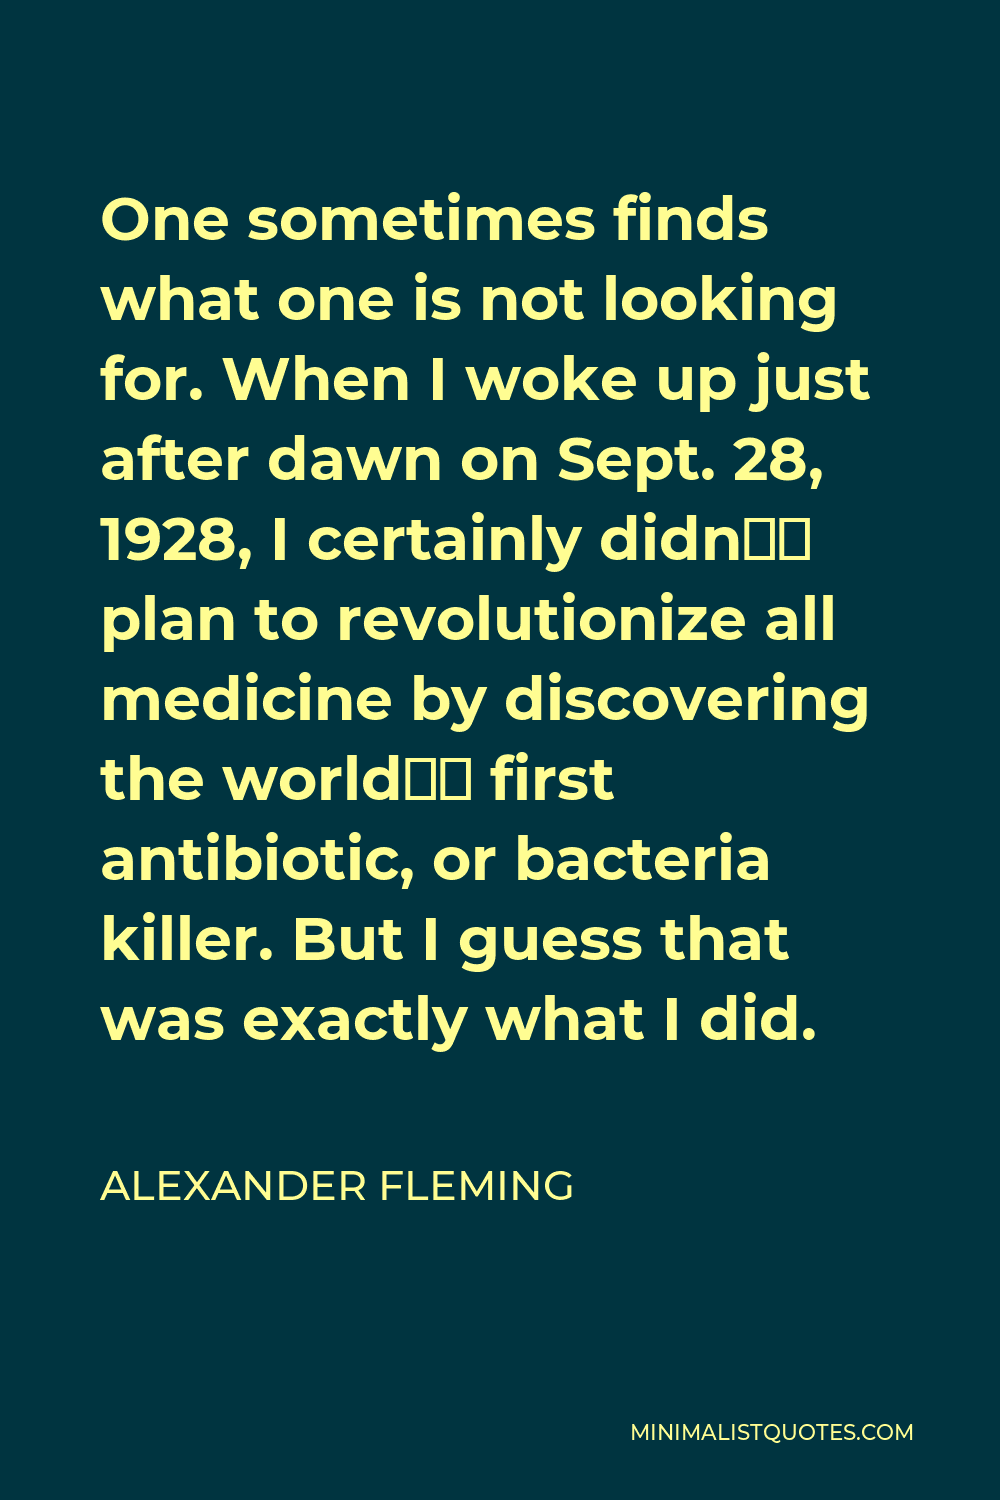 Alexander Fleming Quote - One sometimes finds what one is not looking for.